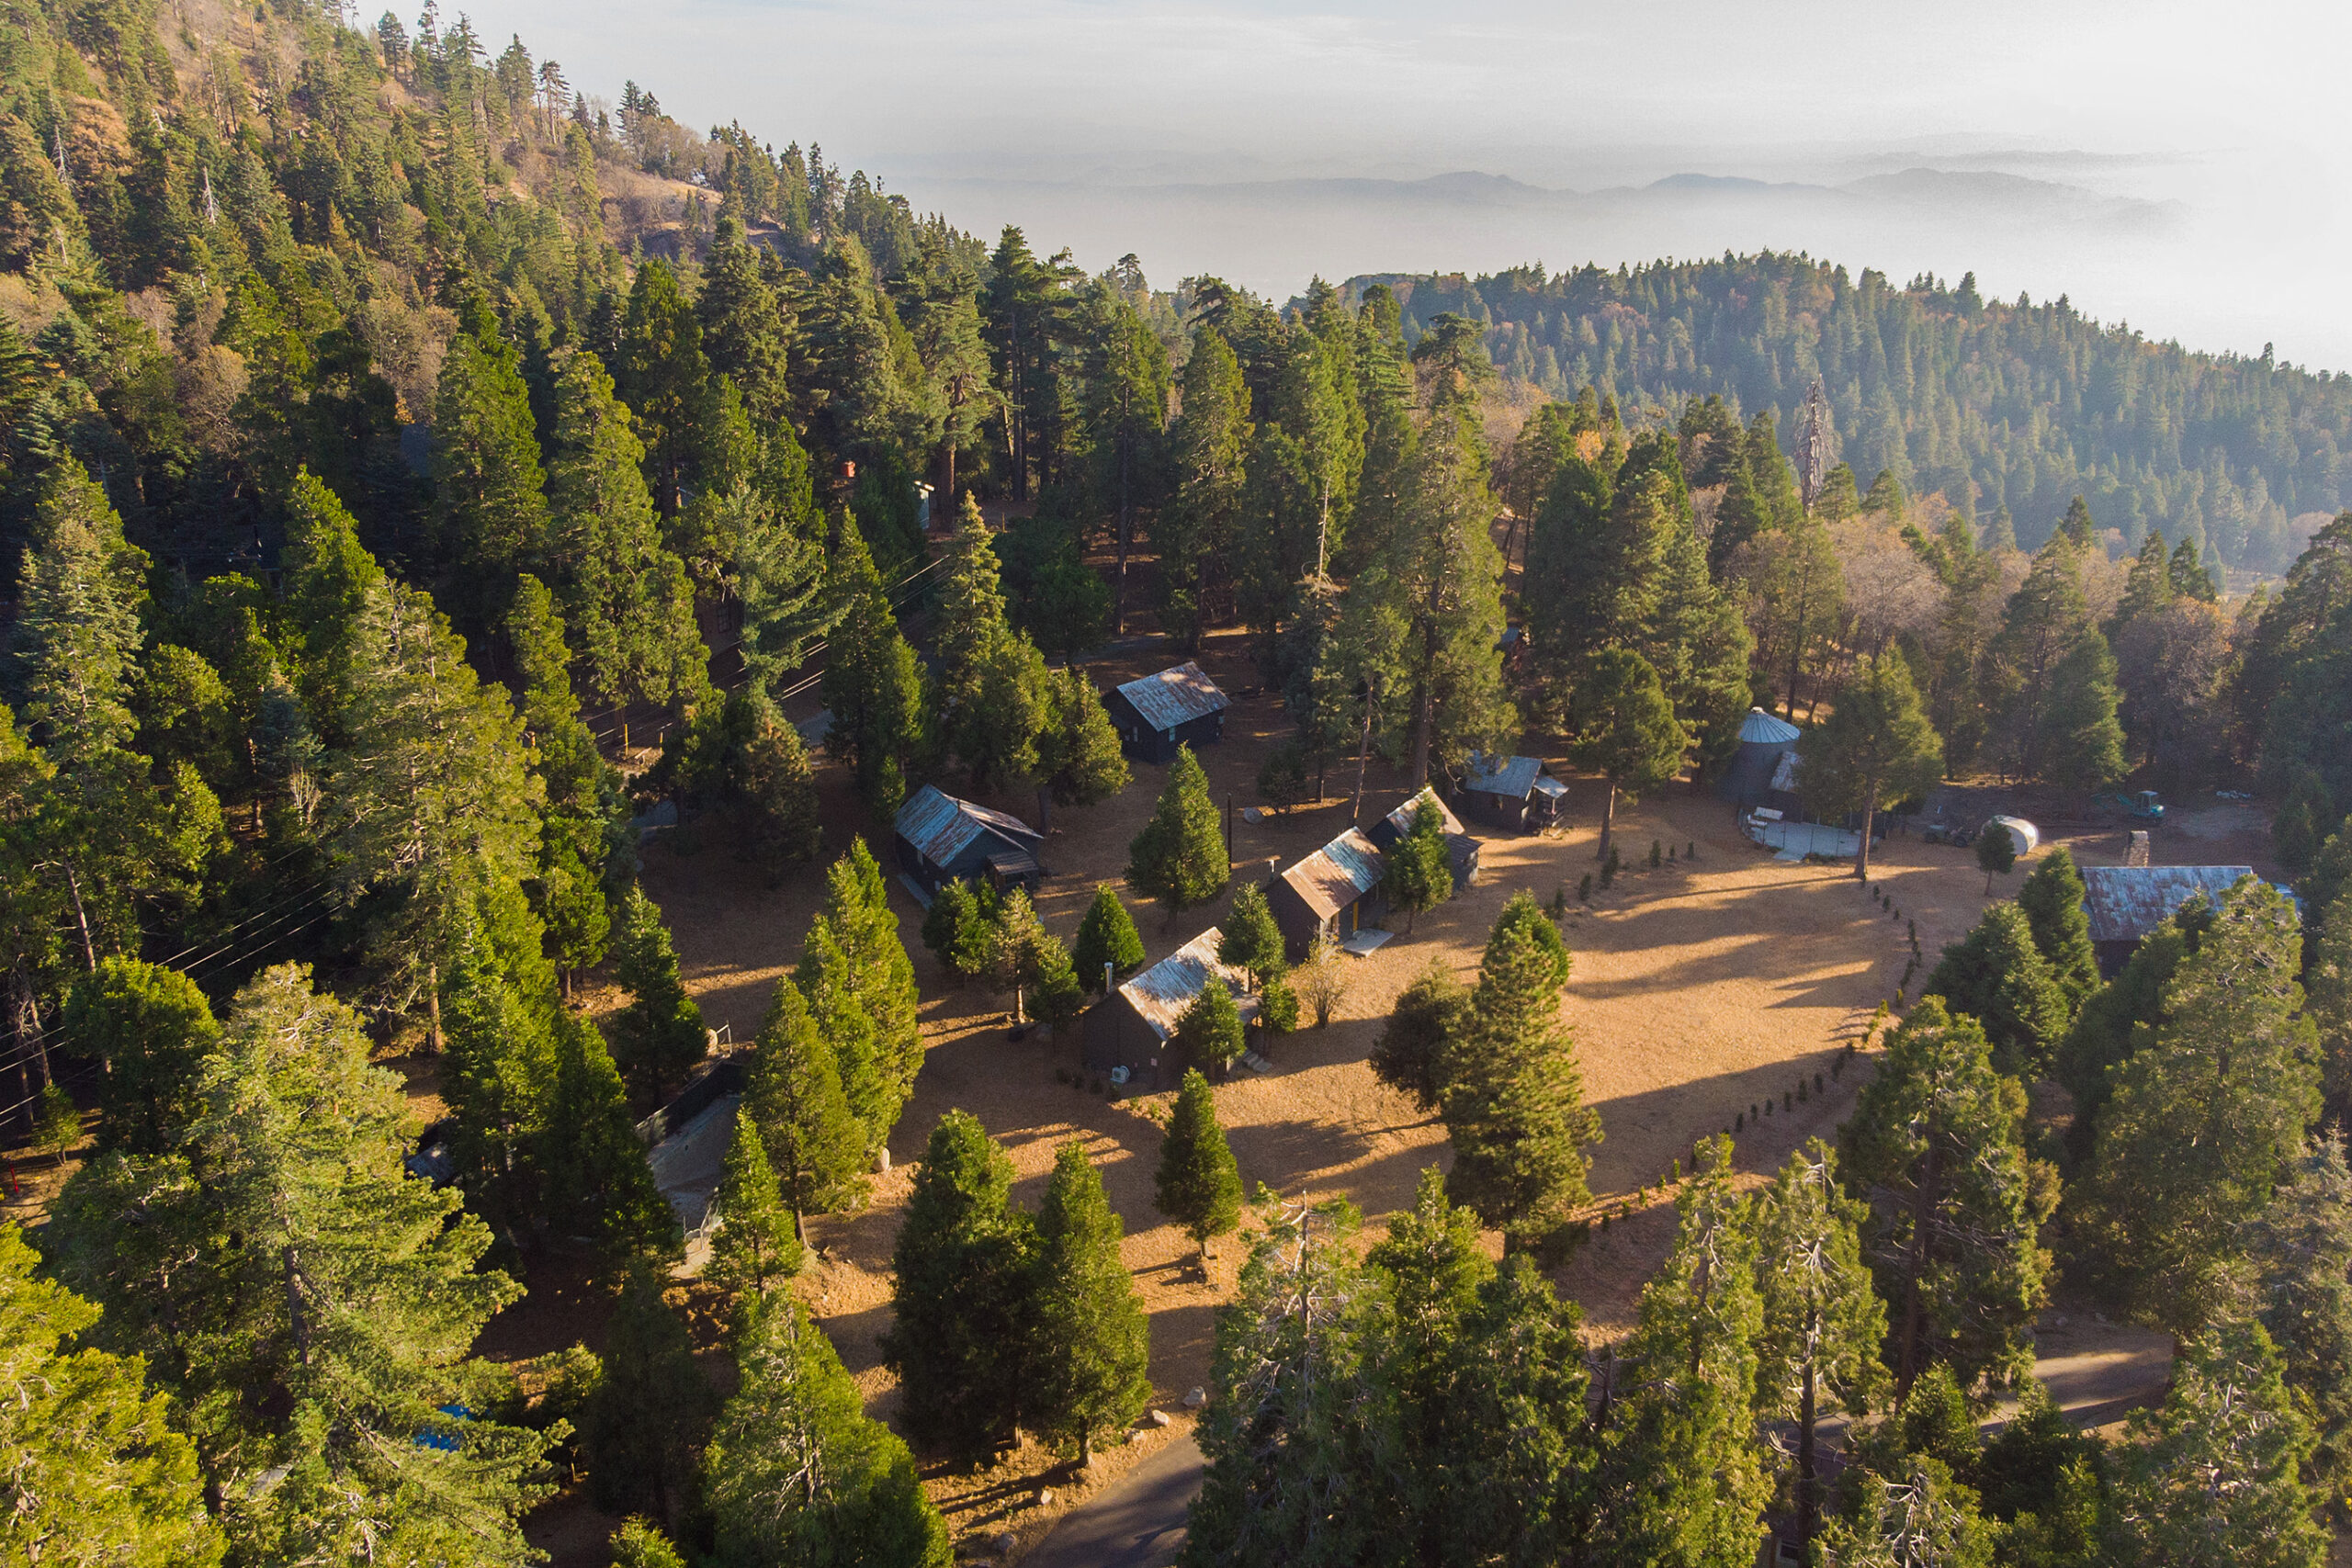 Birds eye view of The Perch's cluster of cabins set amongst conifer trees in Lake Arrowhead, California.